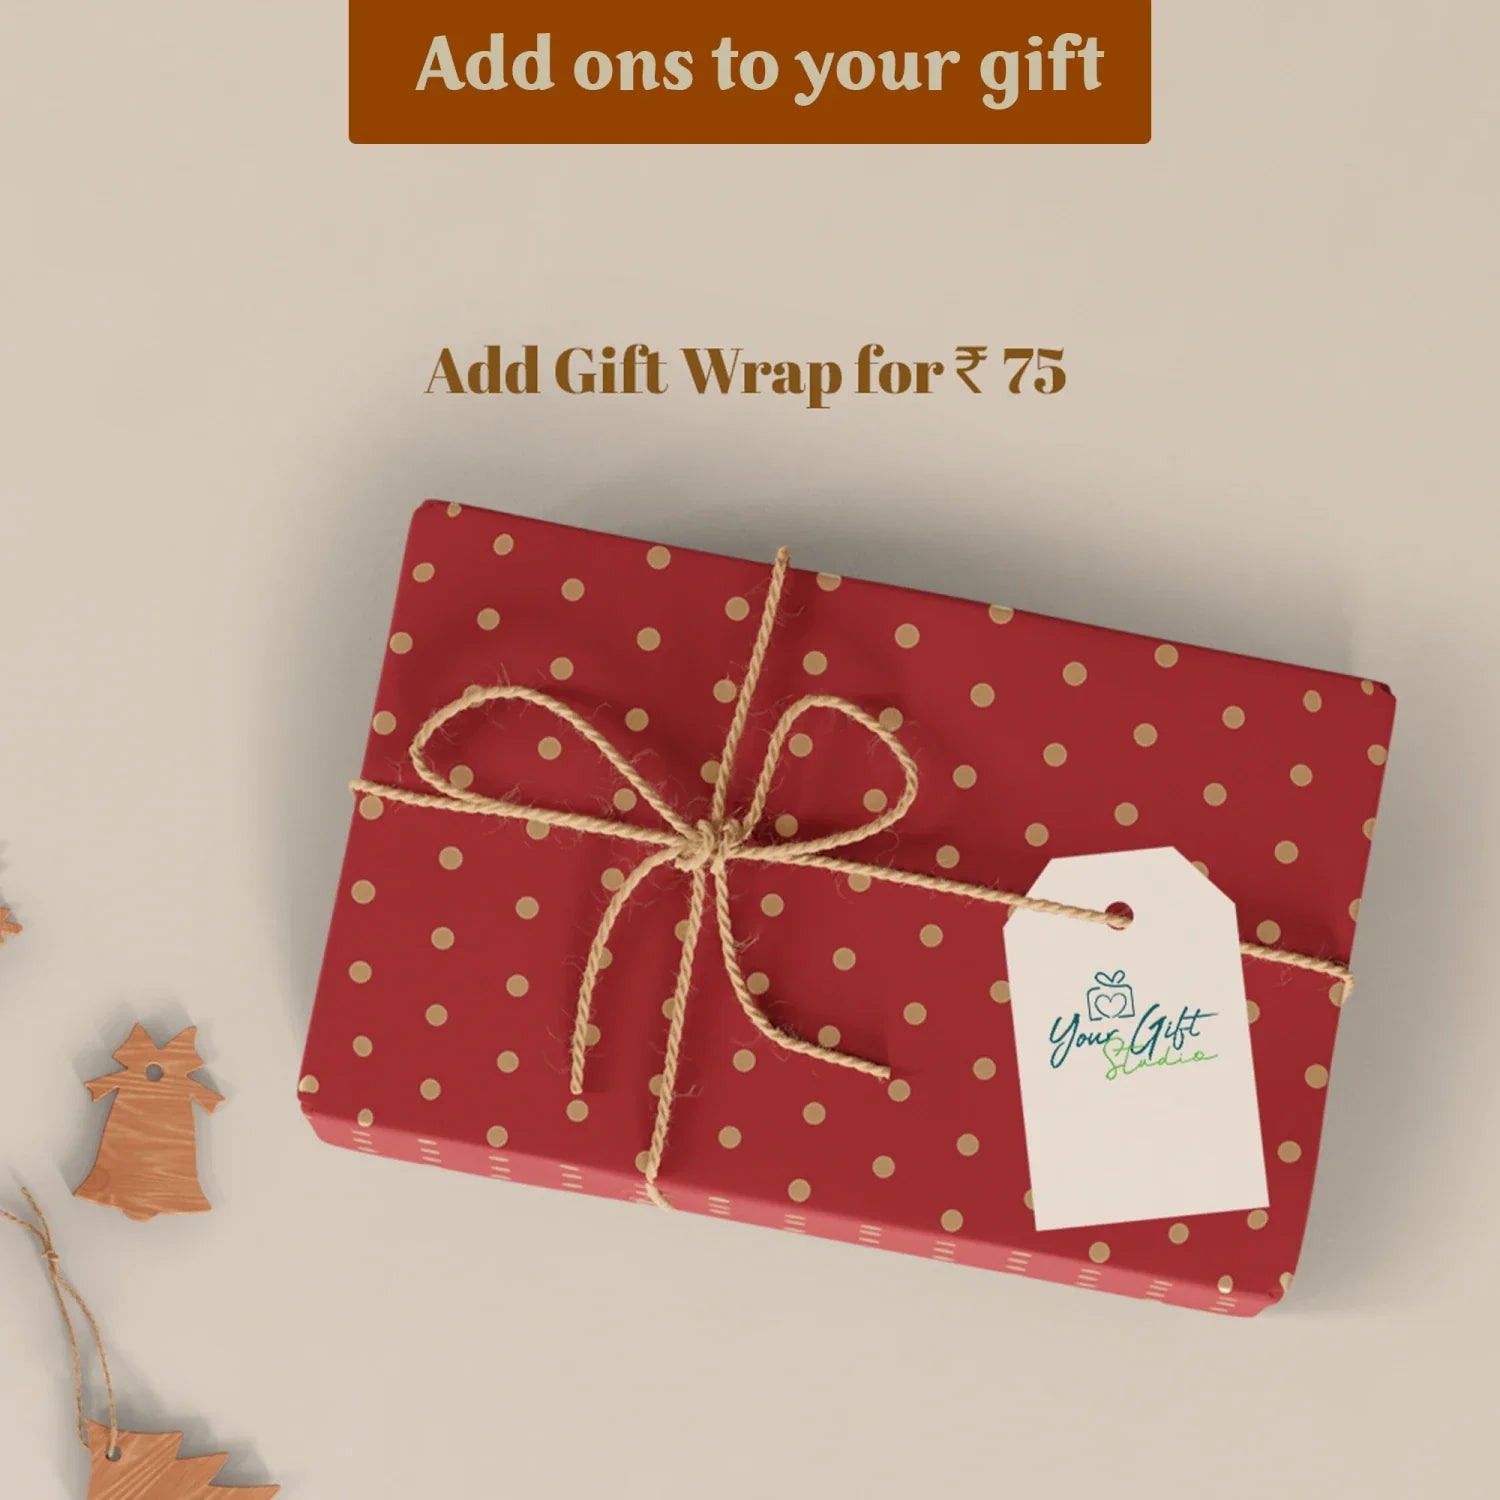 "Wrap your customized gift with love and good wishes and make it perfect for gifting to your partner  "